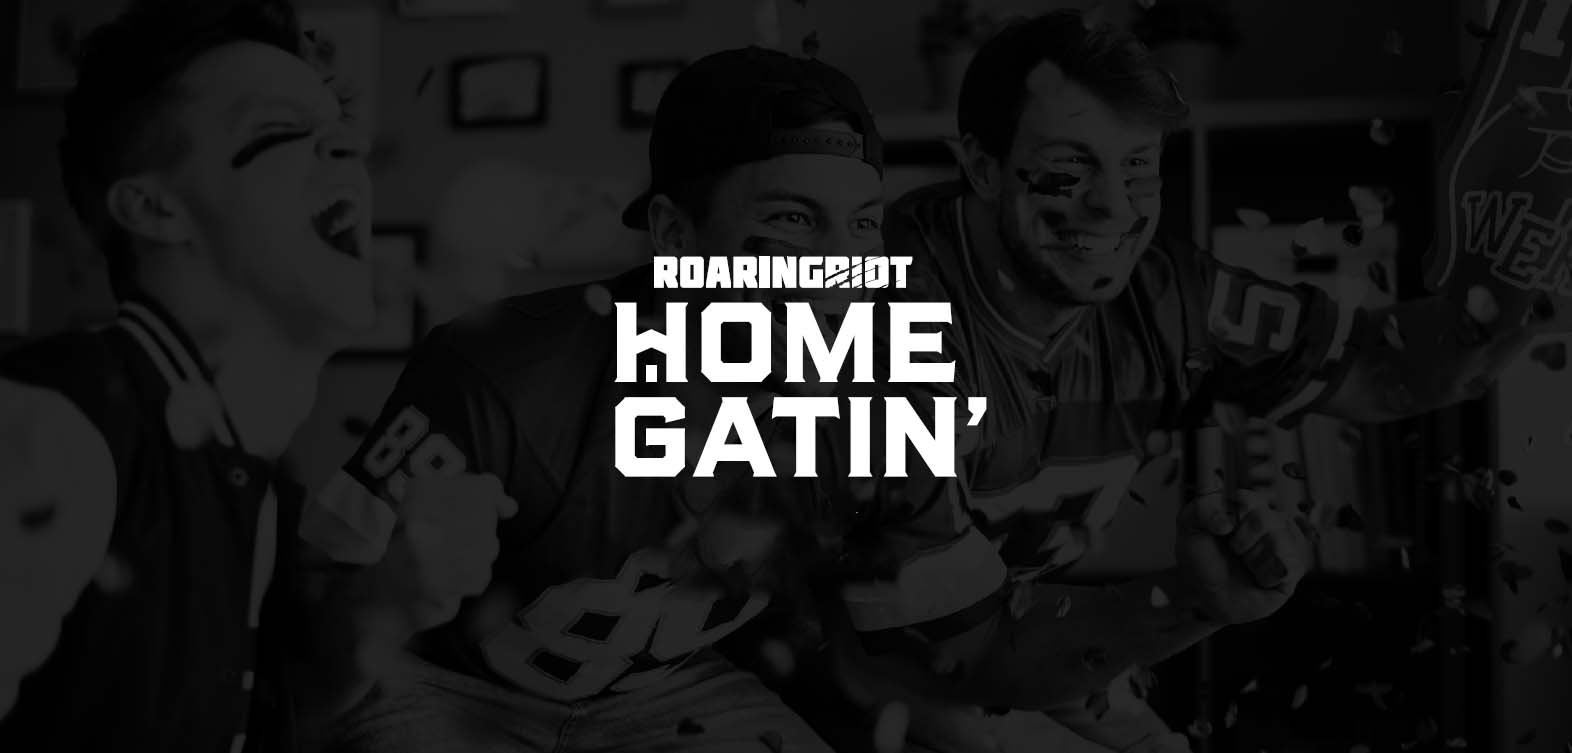 Roaring Riot Is Proud To Present: Homegatin’!